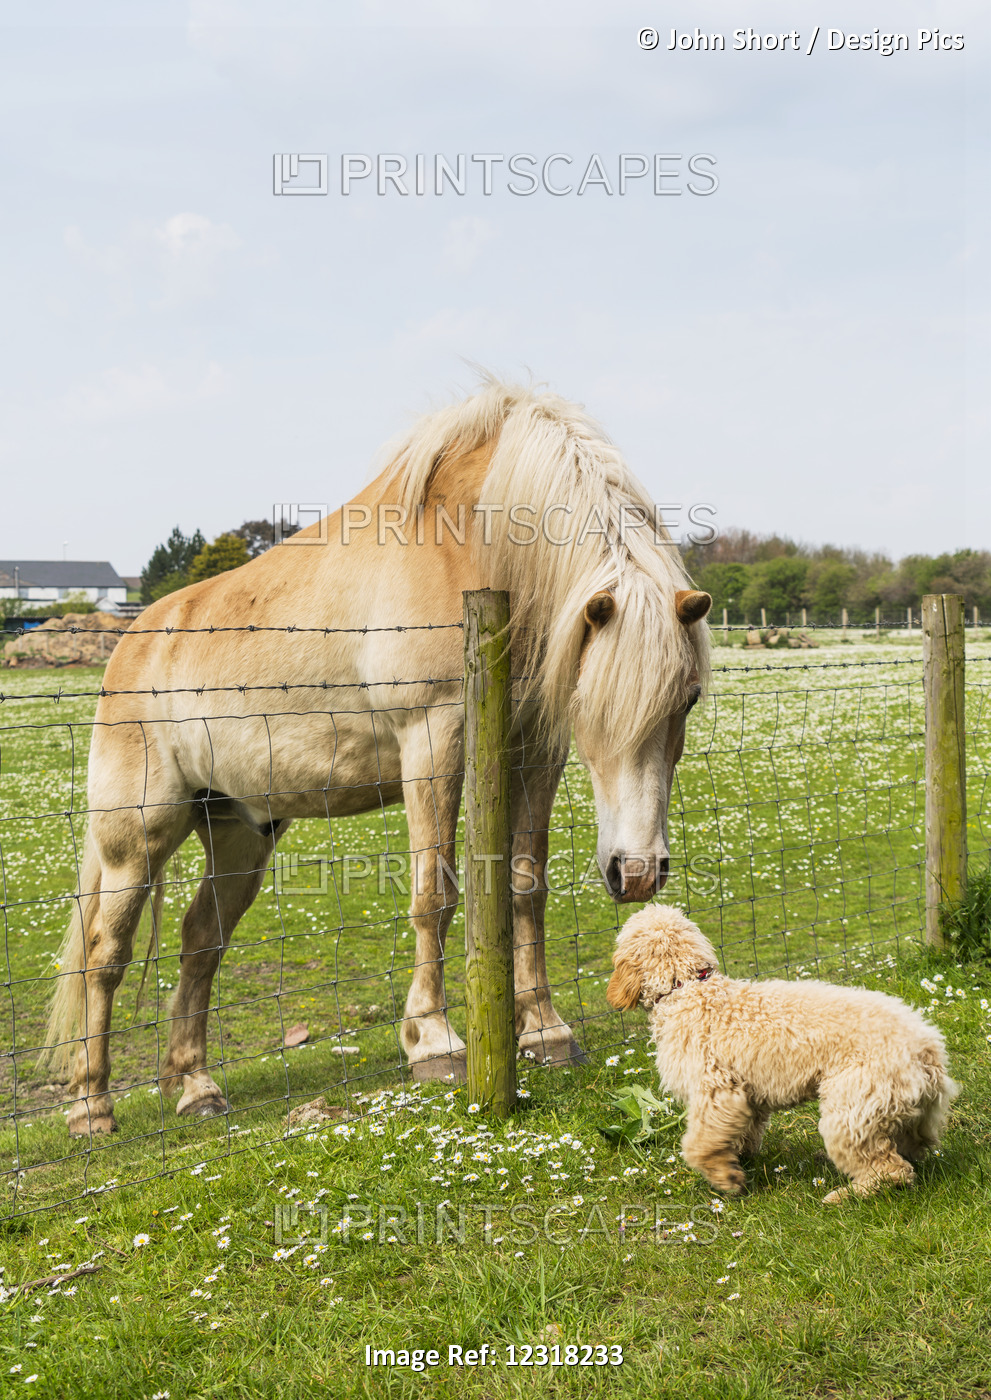 A Blond Cockapoo And Blond Horse Meet At A Fence And Greet One Another; South ...